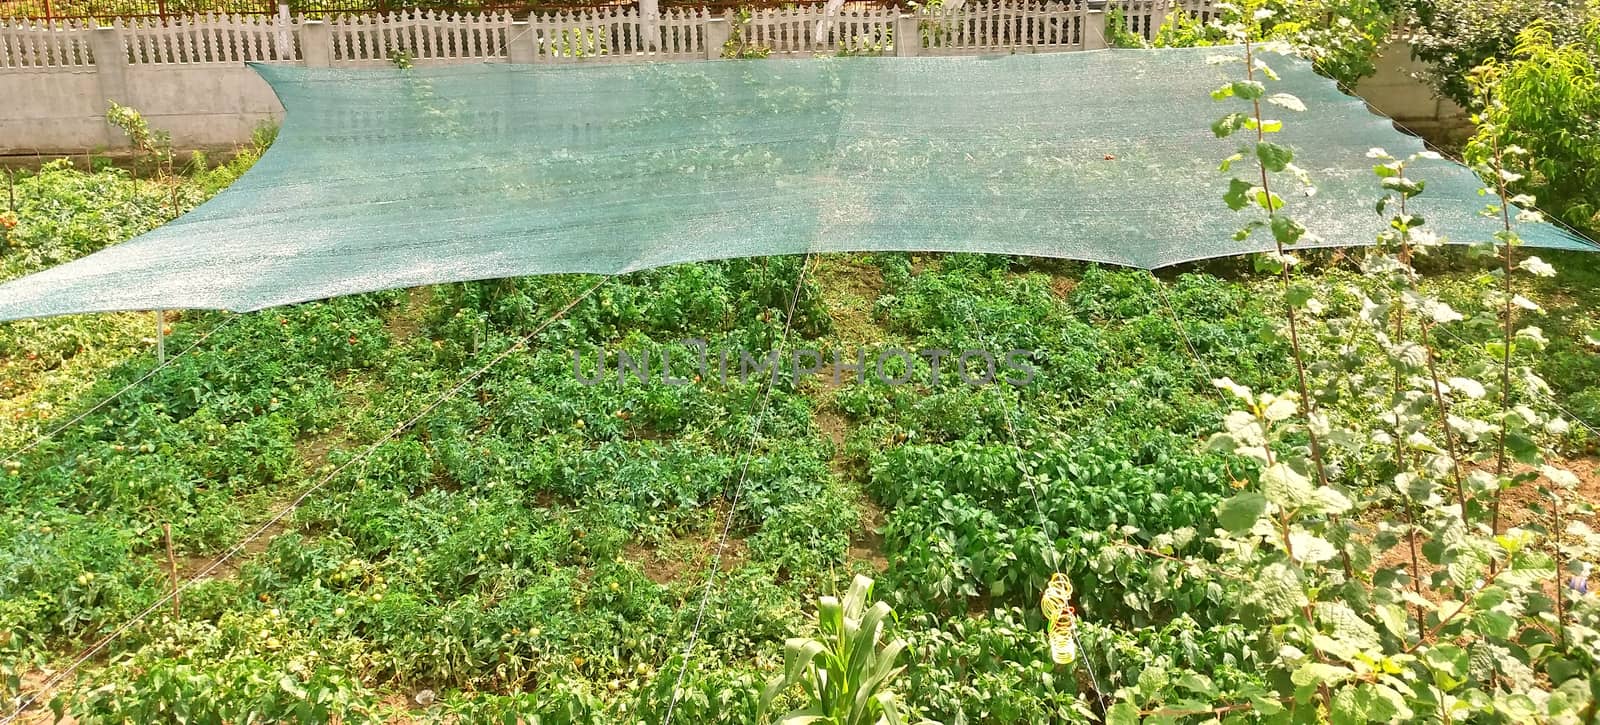 Anti-hail net to protect plants from hail.